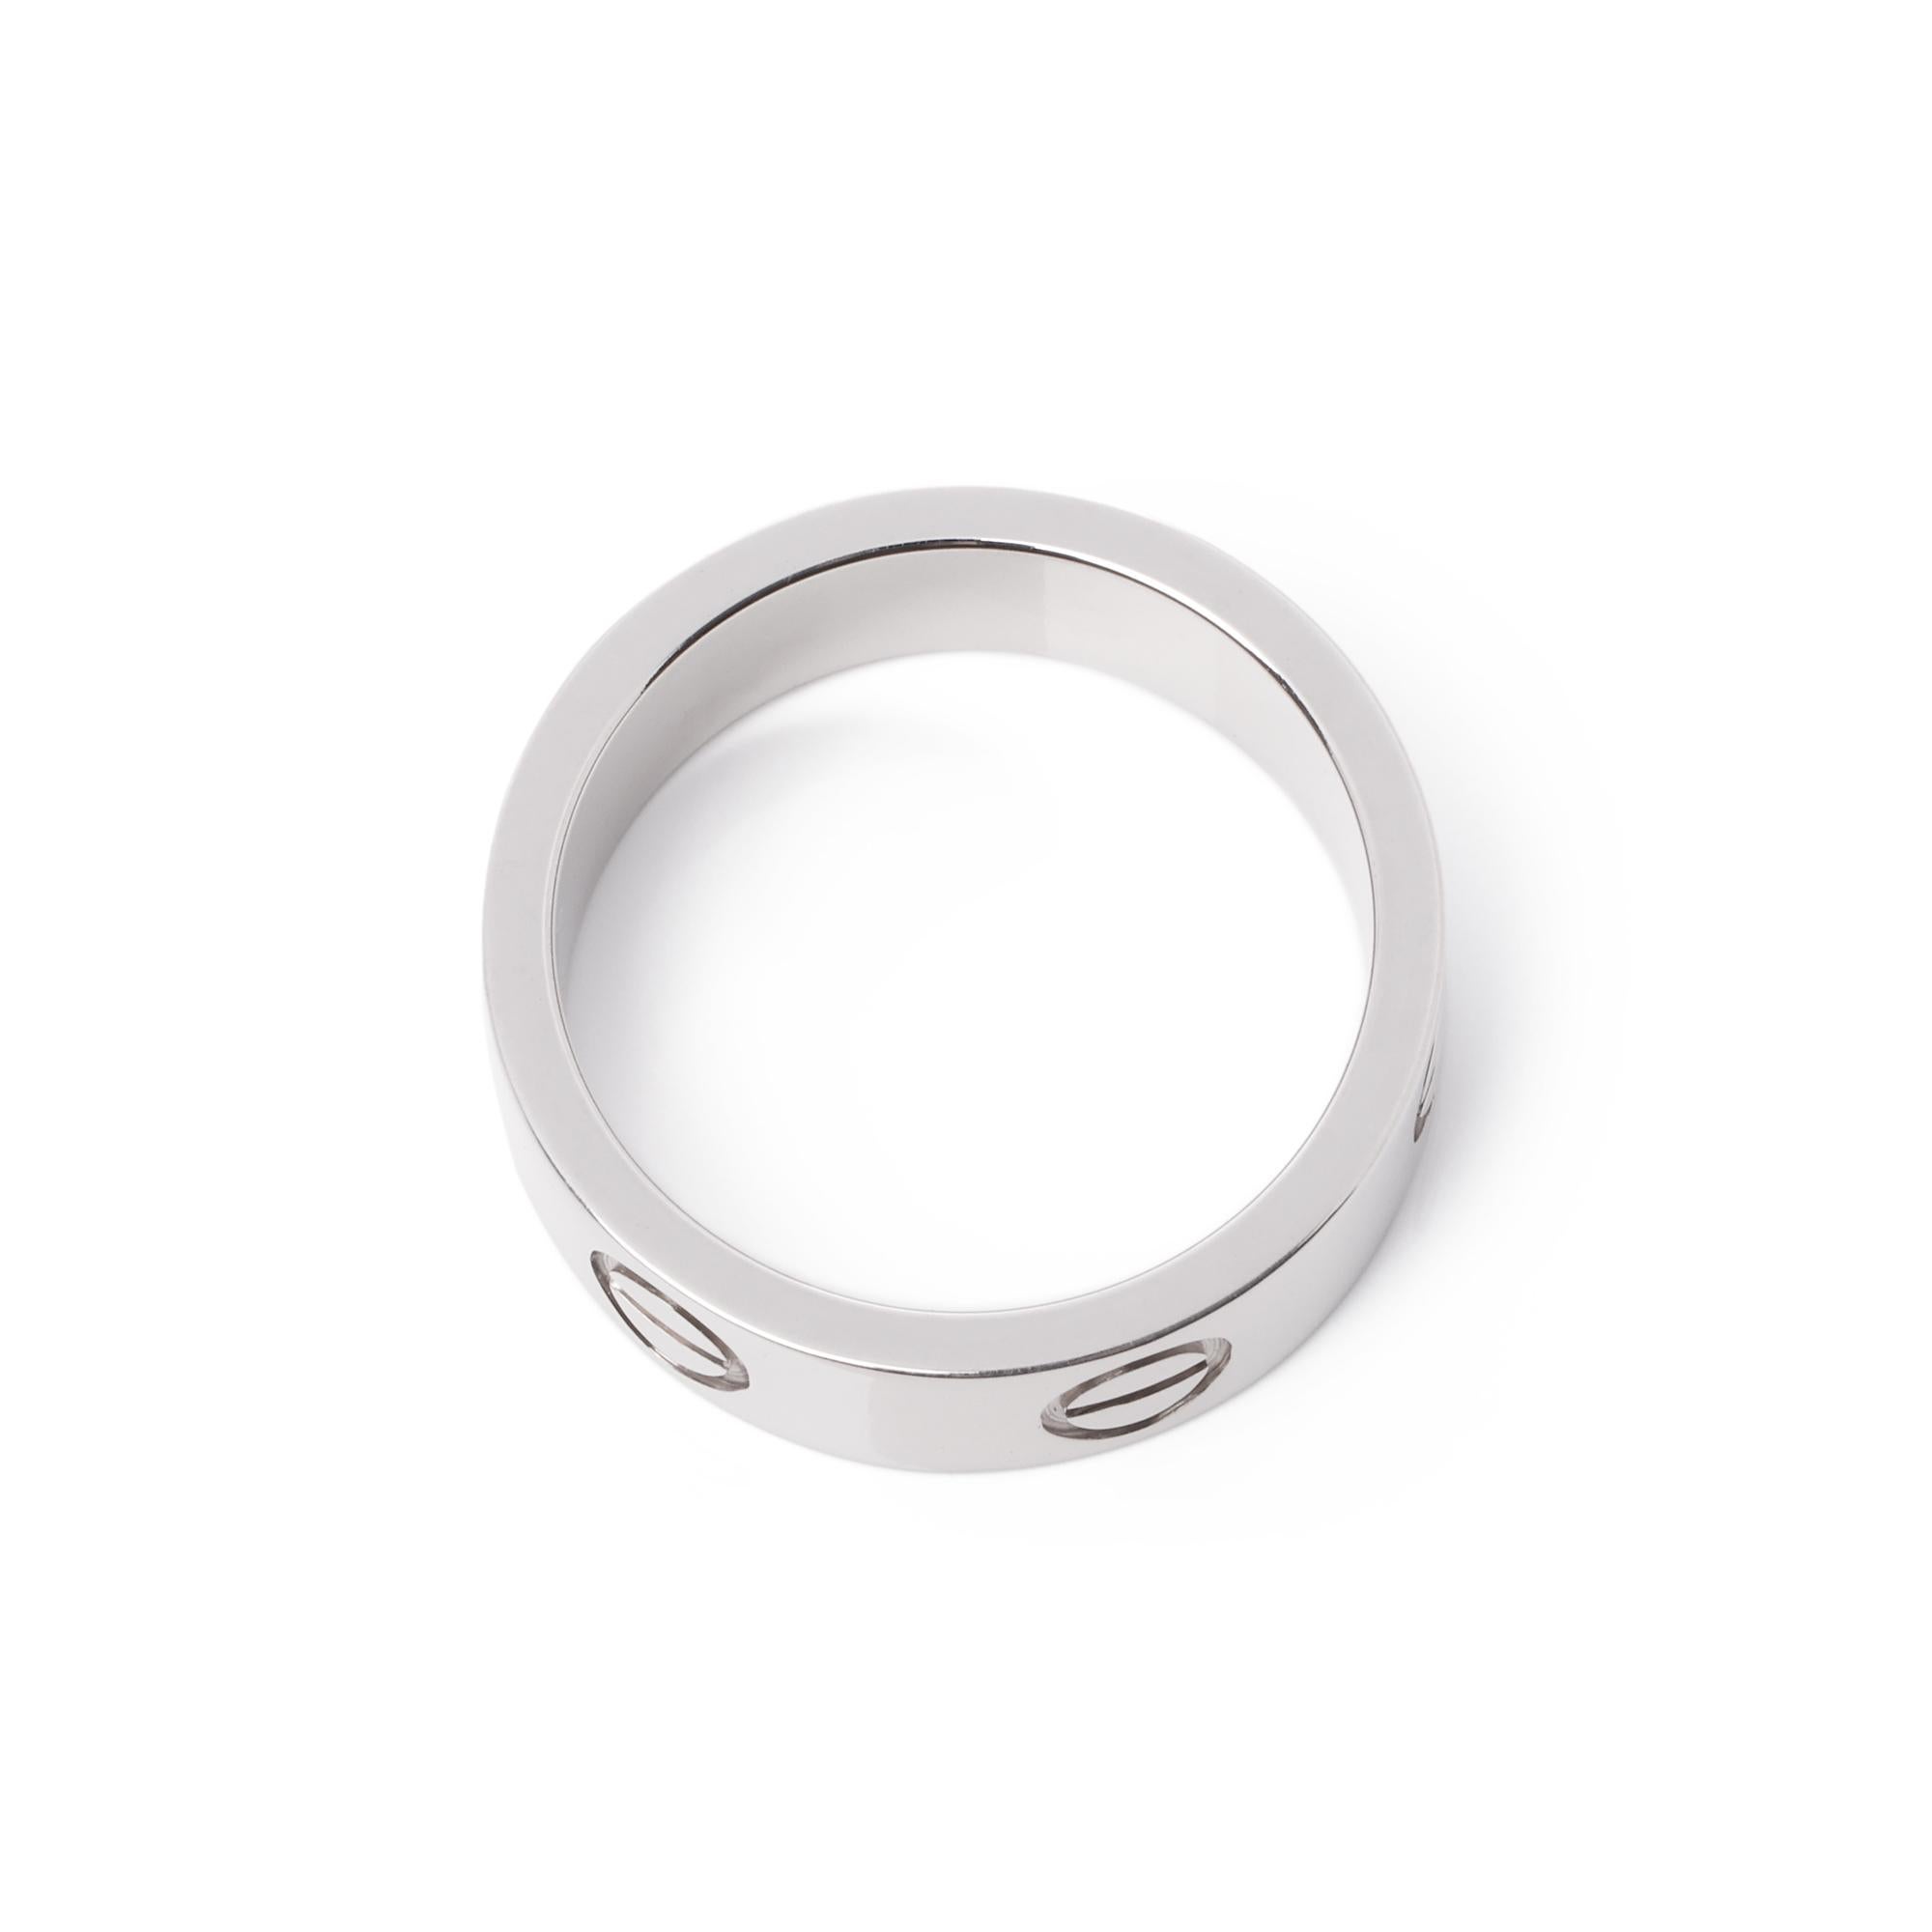 Cartier 18ct White Gold Love Band Ring

Brand Cartier
Model Love Band Ring
Product Type Ring
Material(s) 18ct White Gold
UK Ring Size J 1/2
EU Ring Size 49
US Ring Size 4 3/4
Resizing Possible No
Band Width 5.4mm
Total Weight 6.4g
Model Number